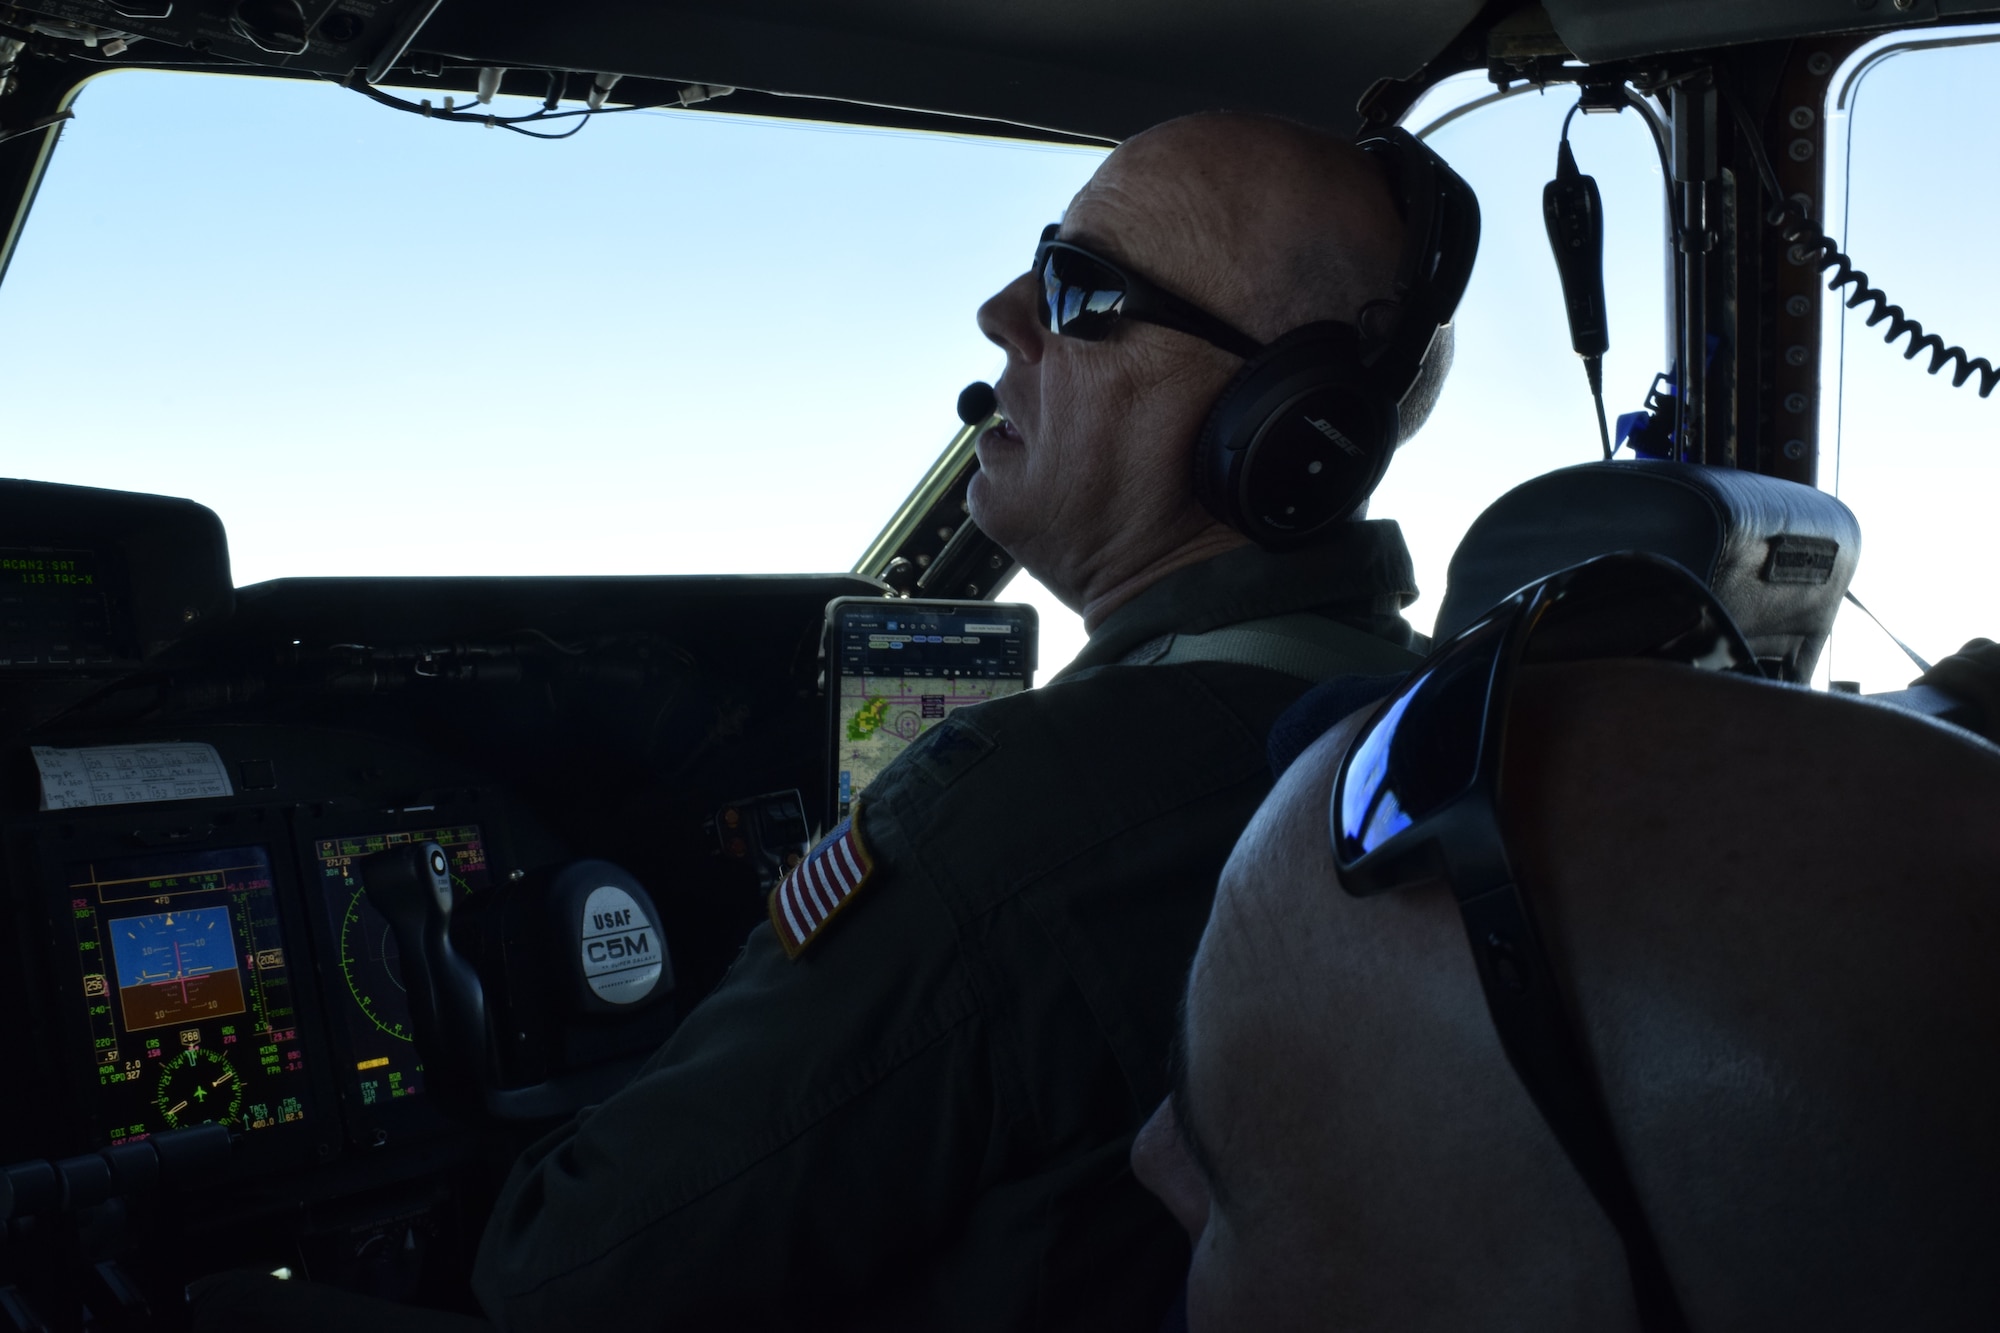 Col. James C. “JC” Miller, 433rd Operations Group commander, mentors a junior pilot (out of frame) during a civic leader local flight over Texas in a C-5M Super Galaxy cargo aircraft Oct. 2, 2021. Local civilian community leaders are invited to participate in unit activities to promote understanding of the military mission. (U.S. Air Force photo by Senior Airman Brittany Wich)